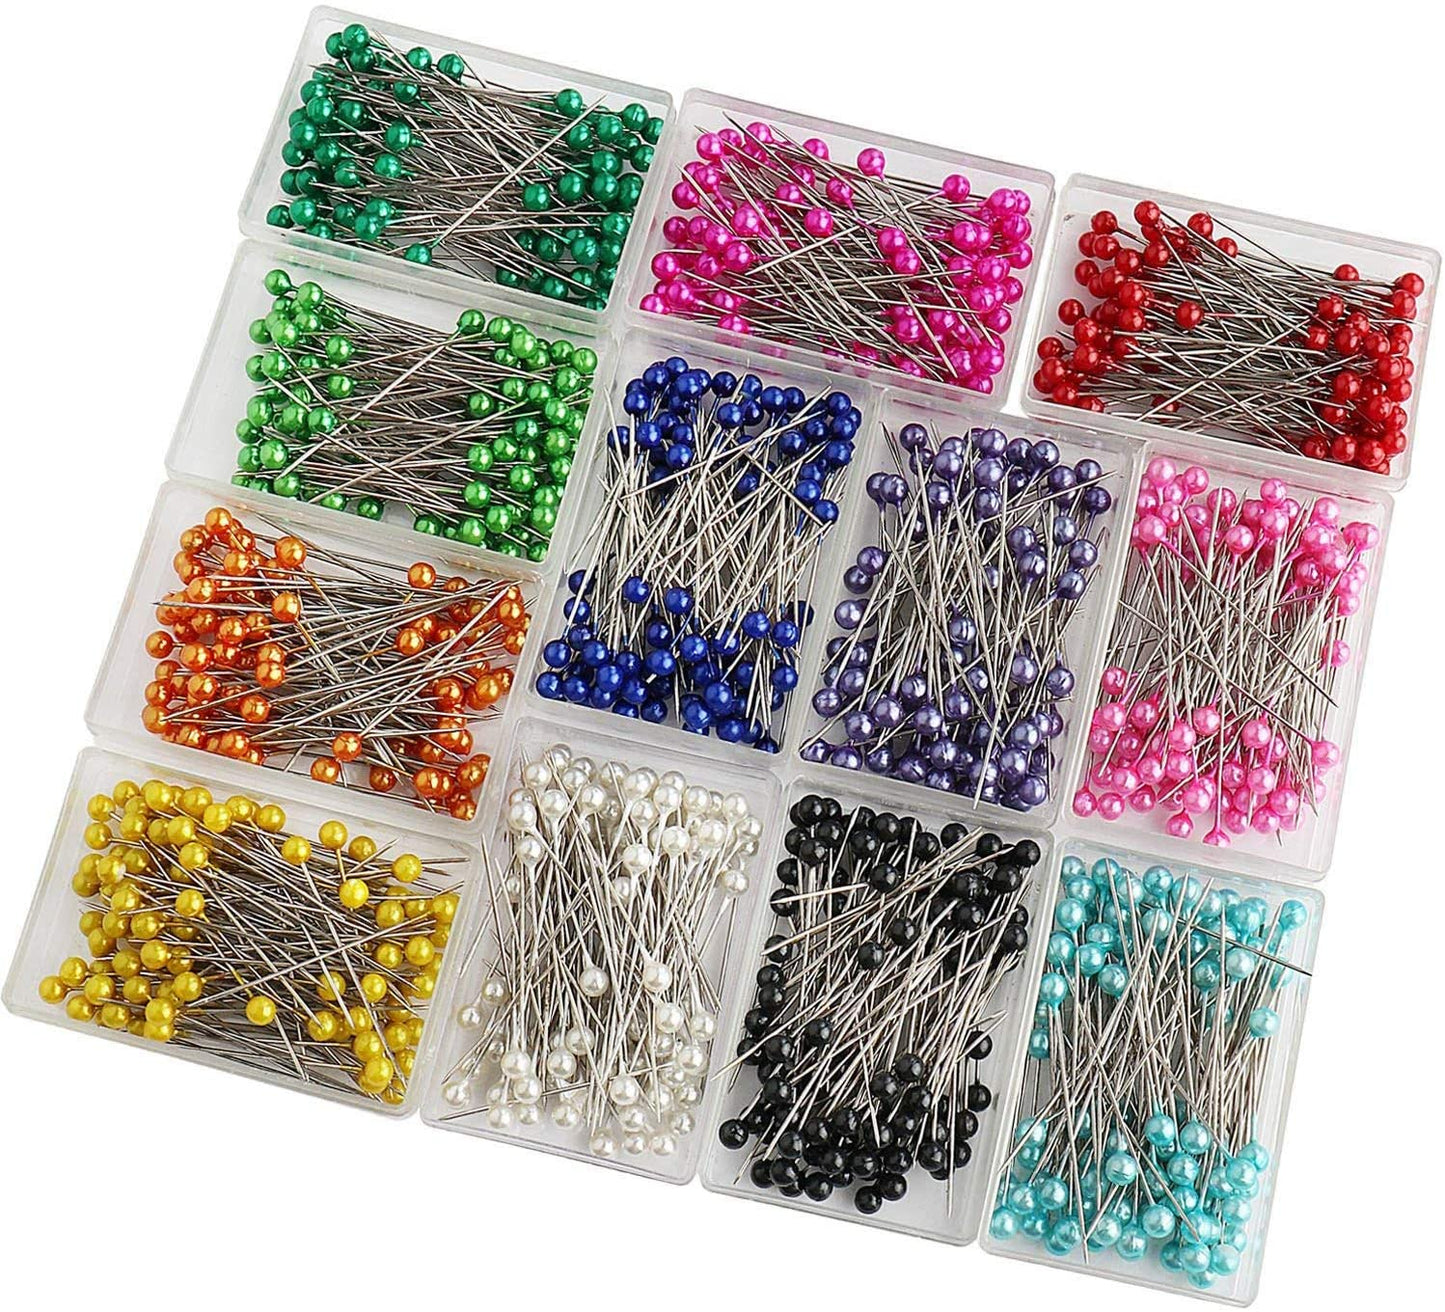 SUBANG 1200 Pieces Sewing Pins 38mm Multicolor Pearlized Head Pins for Dressmaking Jewelry Components Flower Decoration with Transparent Cases, 12 Colors - (For 8 piece(s))